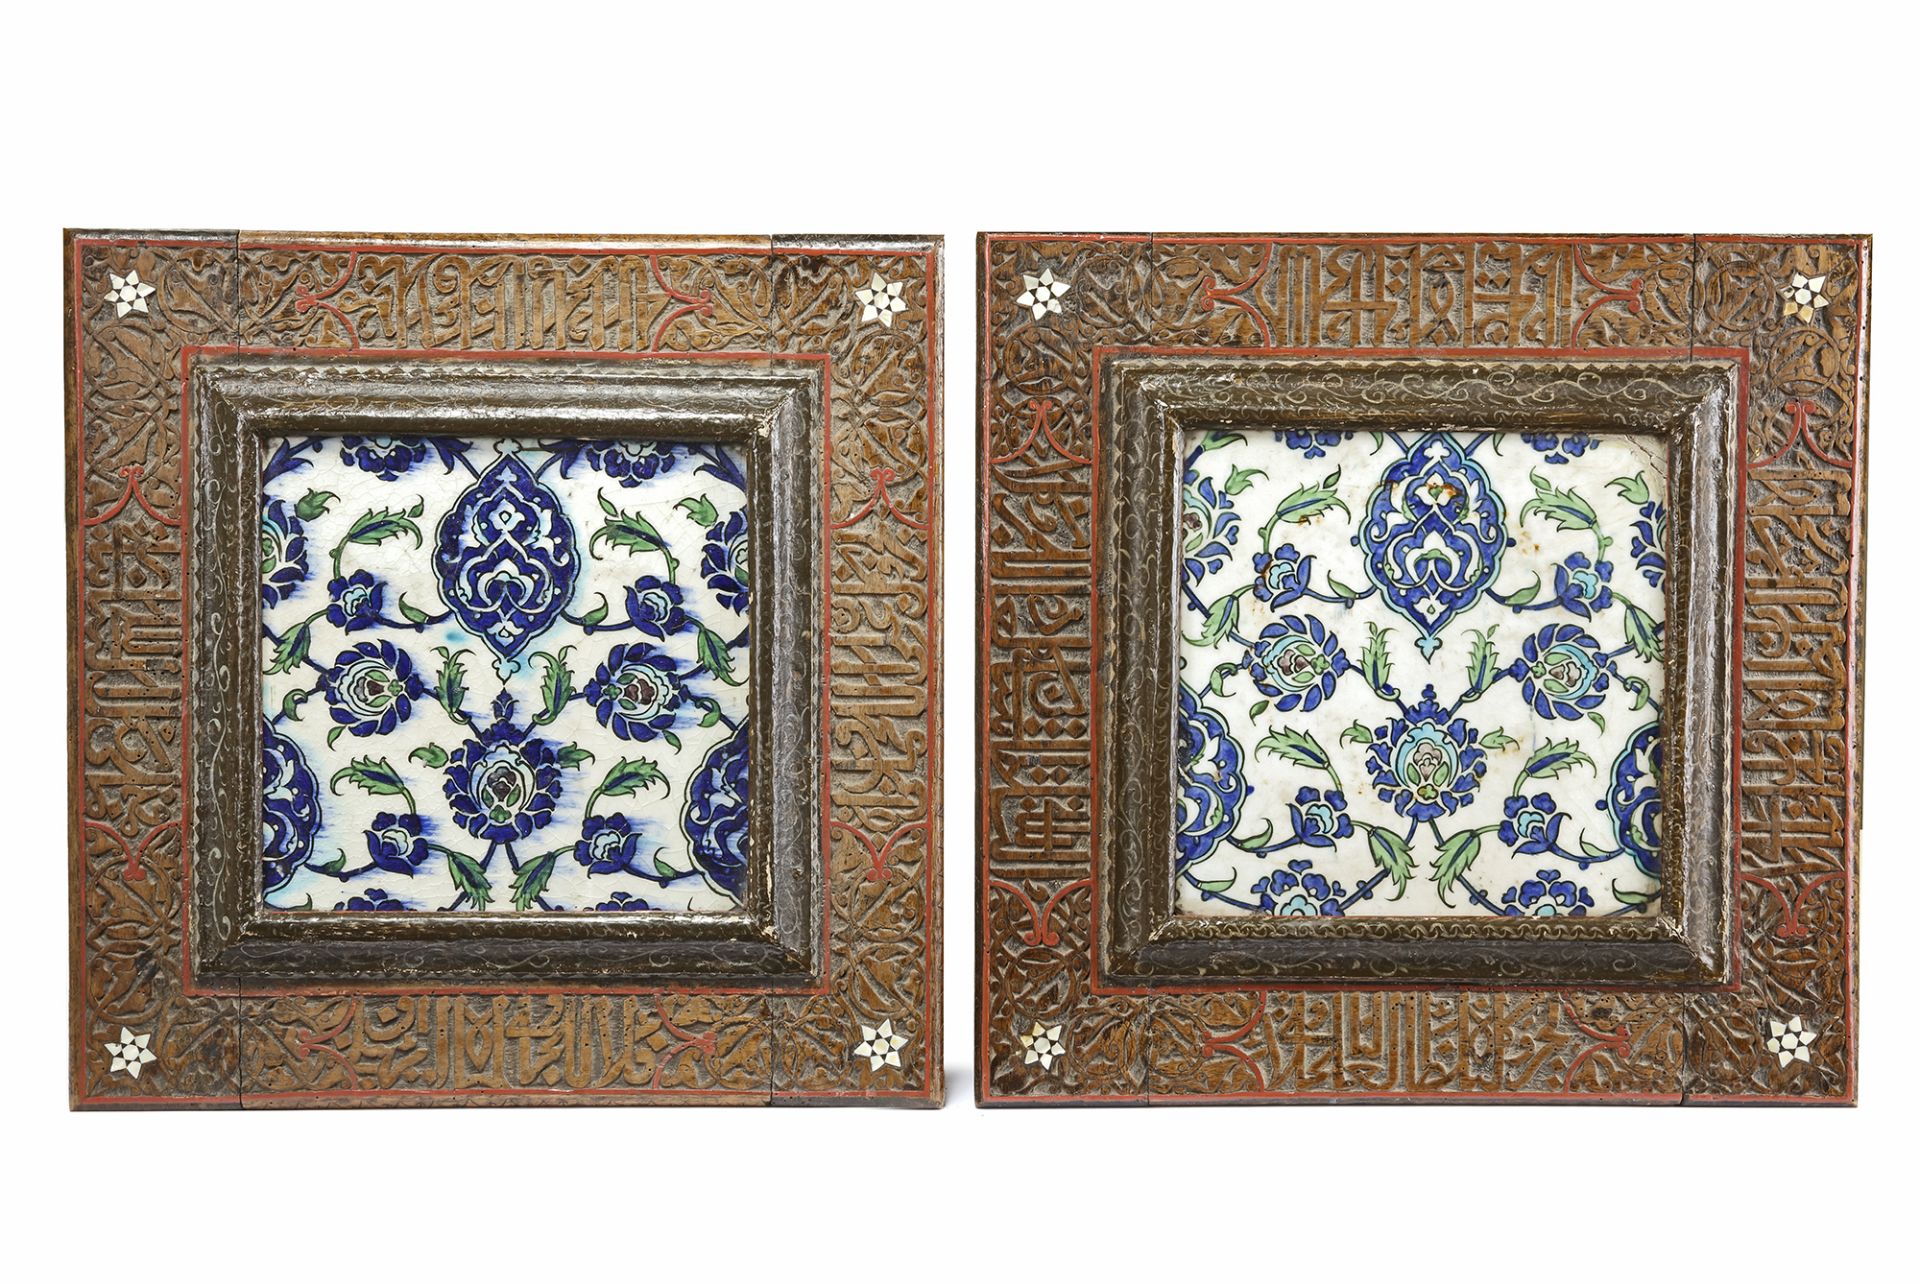 A PAIR OF DAMASCUS BONE-INLAID PAINTED WOOD PLANT STANDS INLAID WITH DAMASCUS POTTERY TILES, SYRIA, - Image 7 of 10